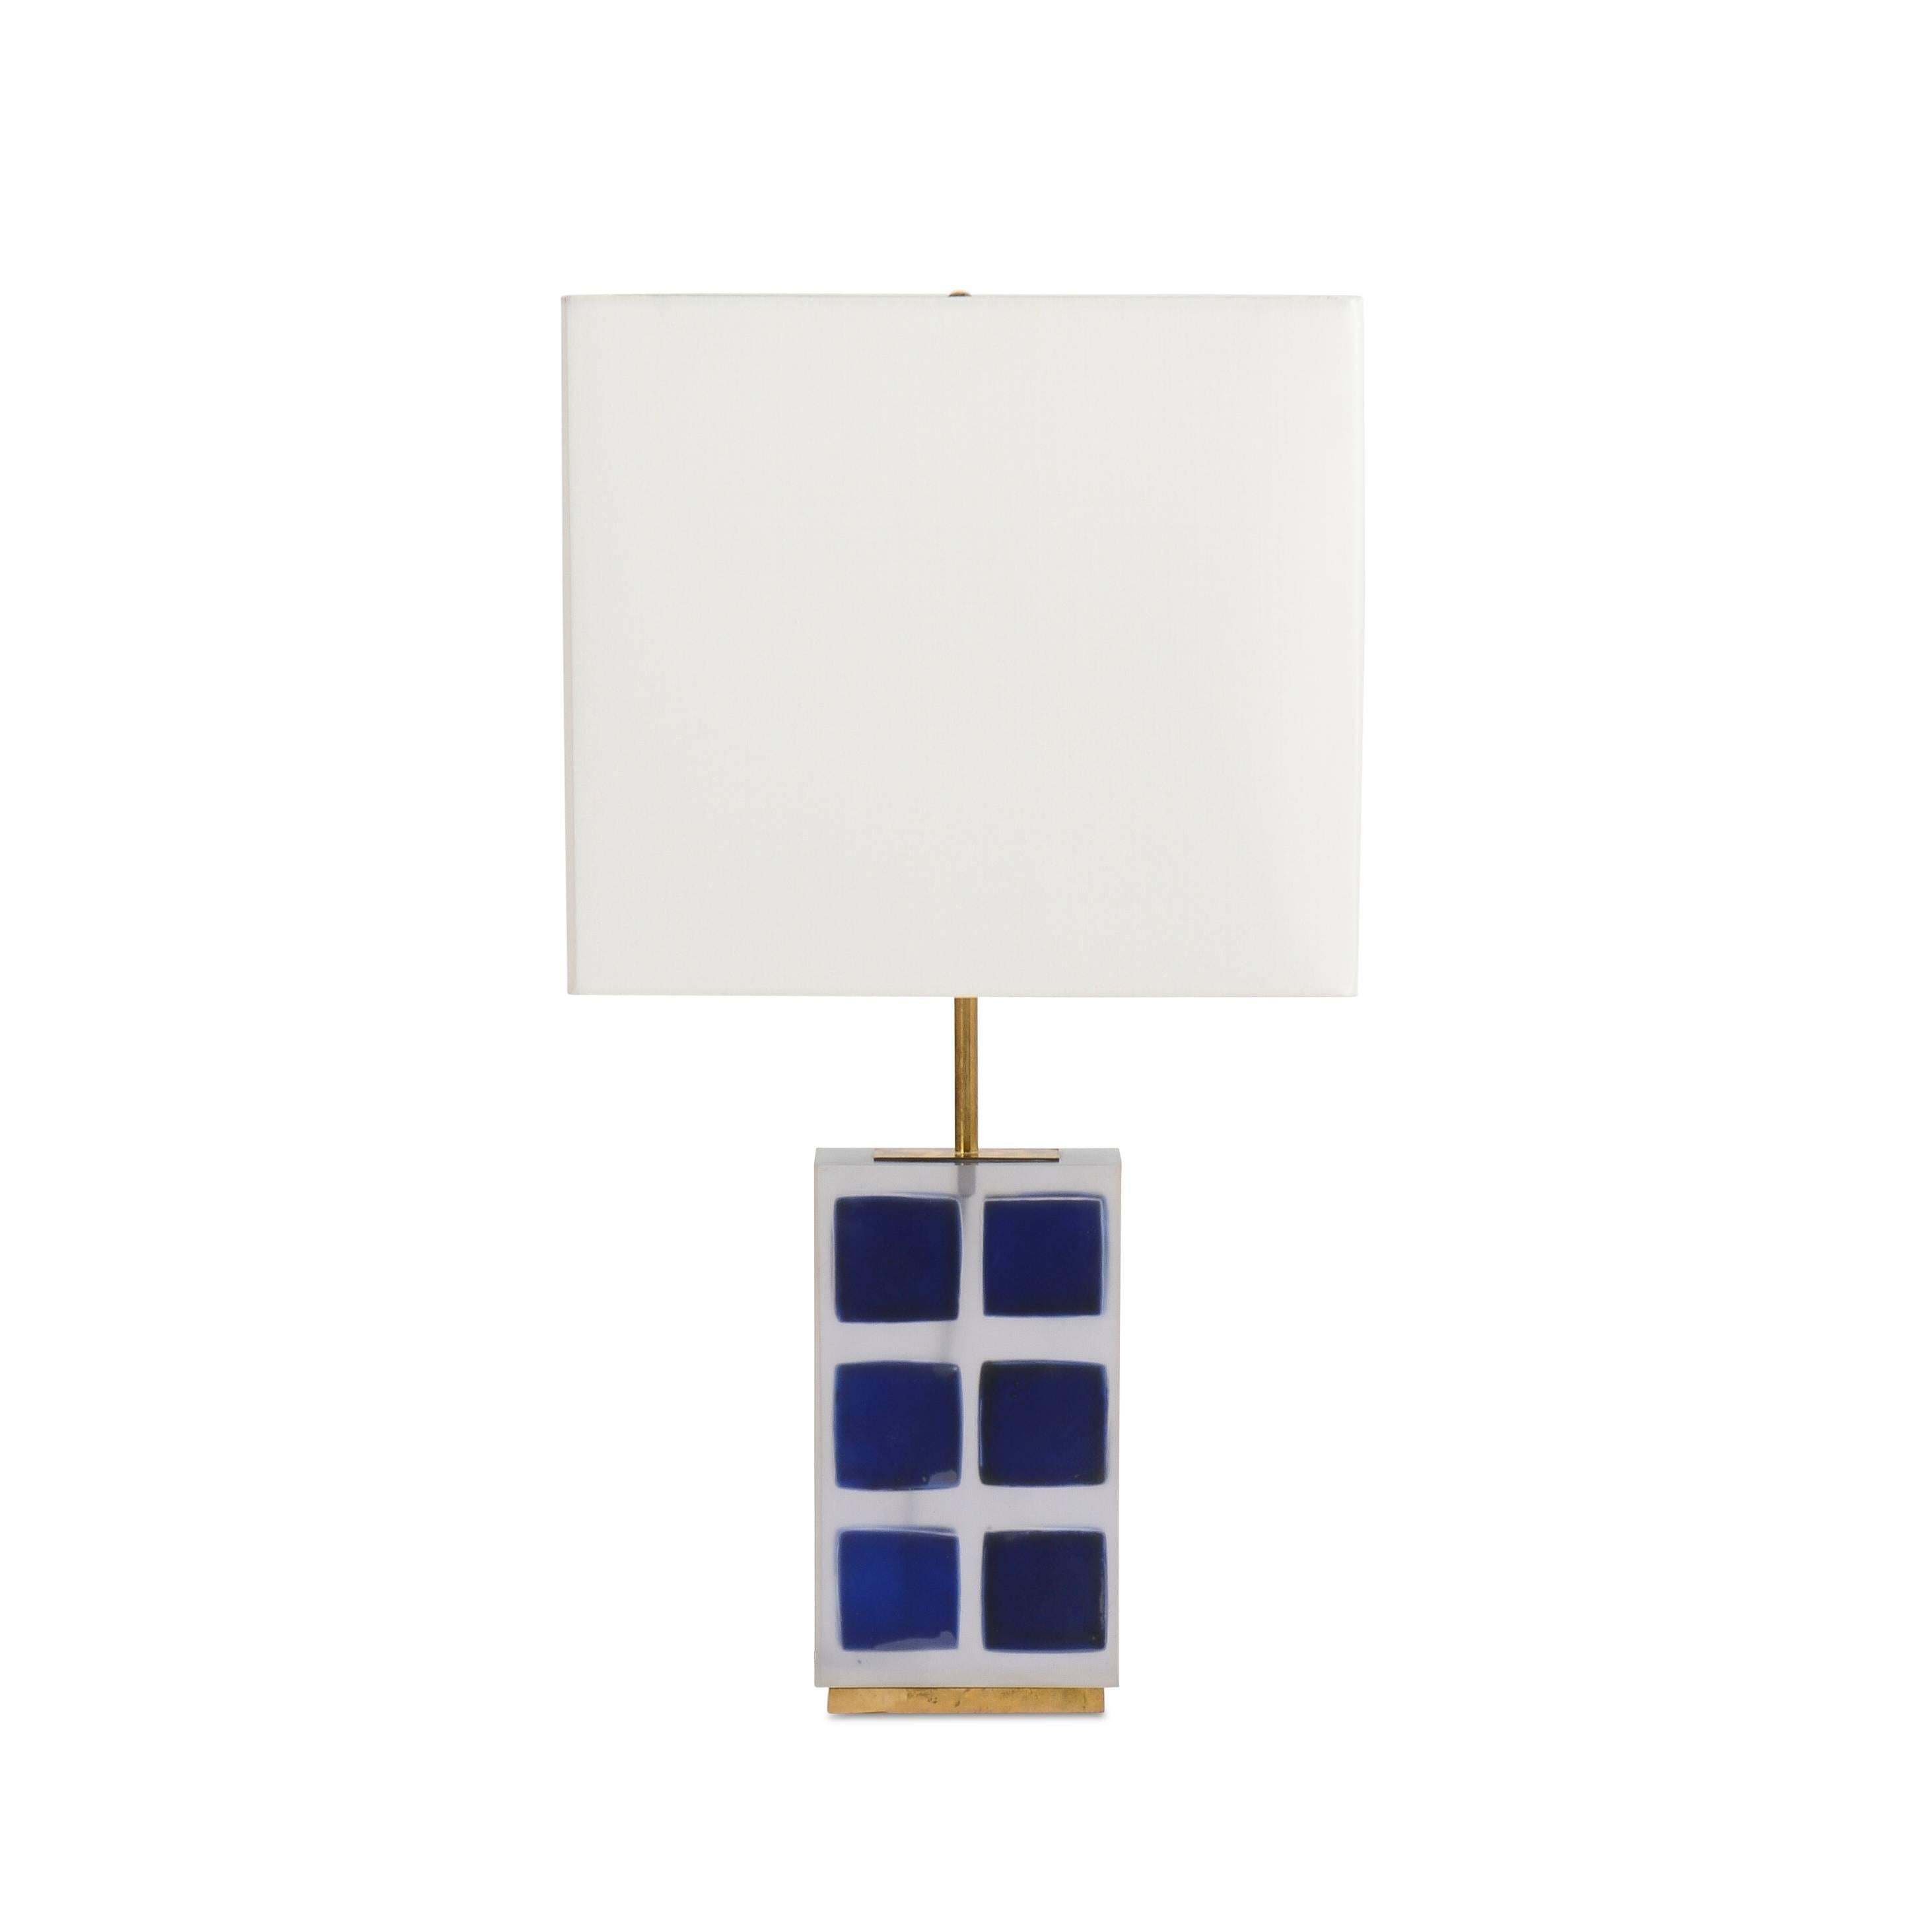 Pair of clear resin table lamps with floating blue cubes.
  